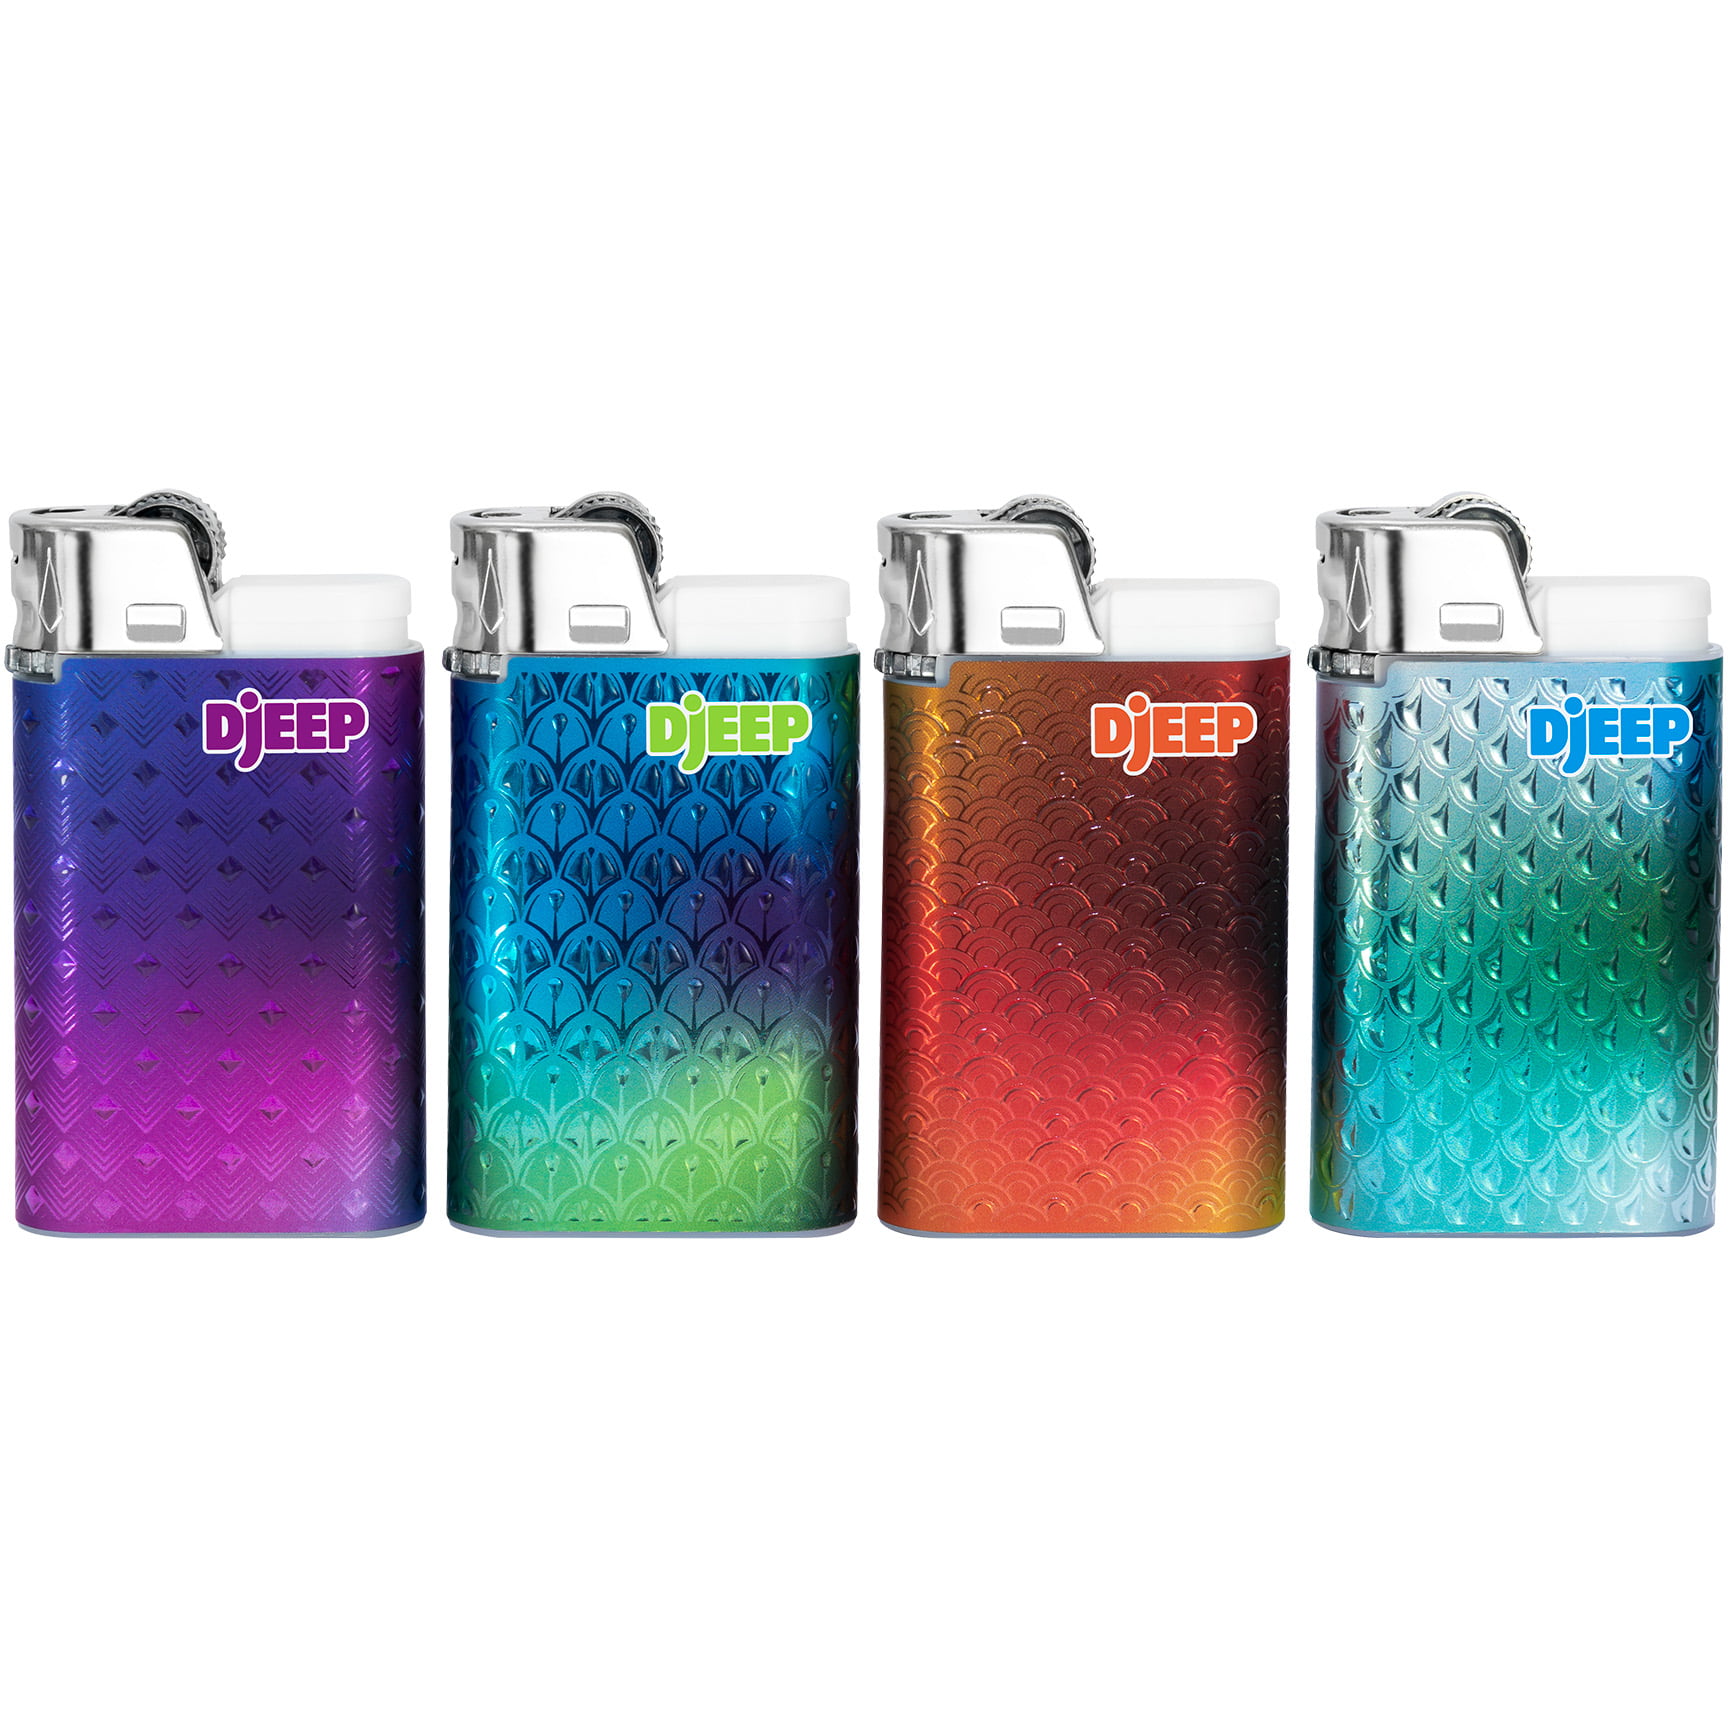 DJEEP Lighters, EDITION Collection Textured Metallic, Geometric Unique Lighters, 4 Count Pack of Disposable Lighters - Walmart.com